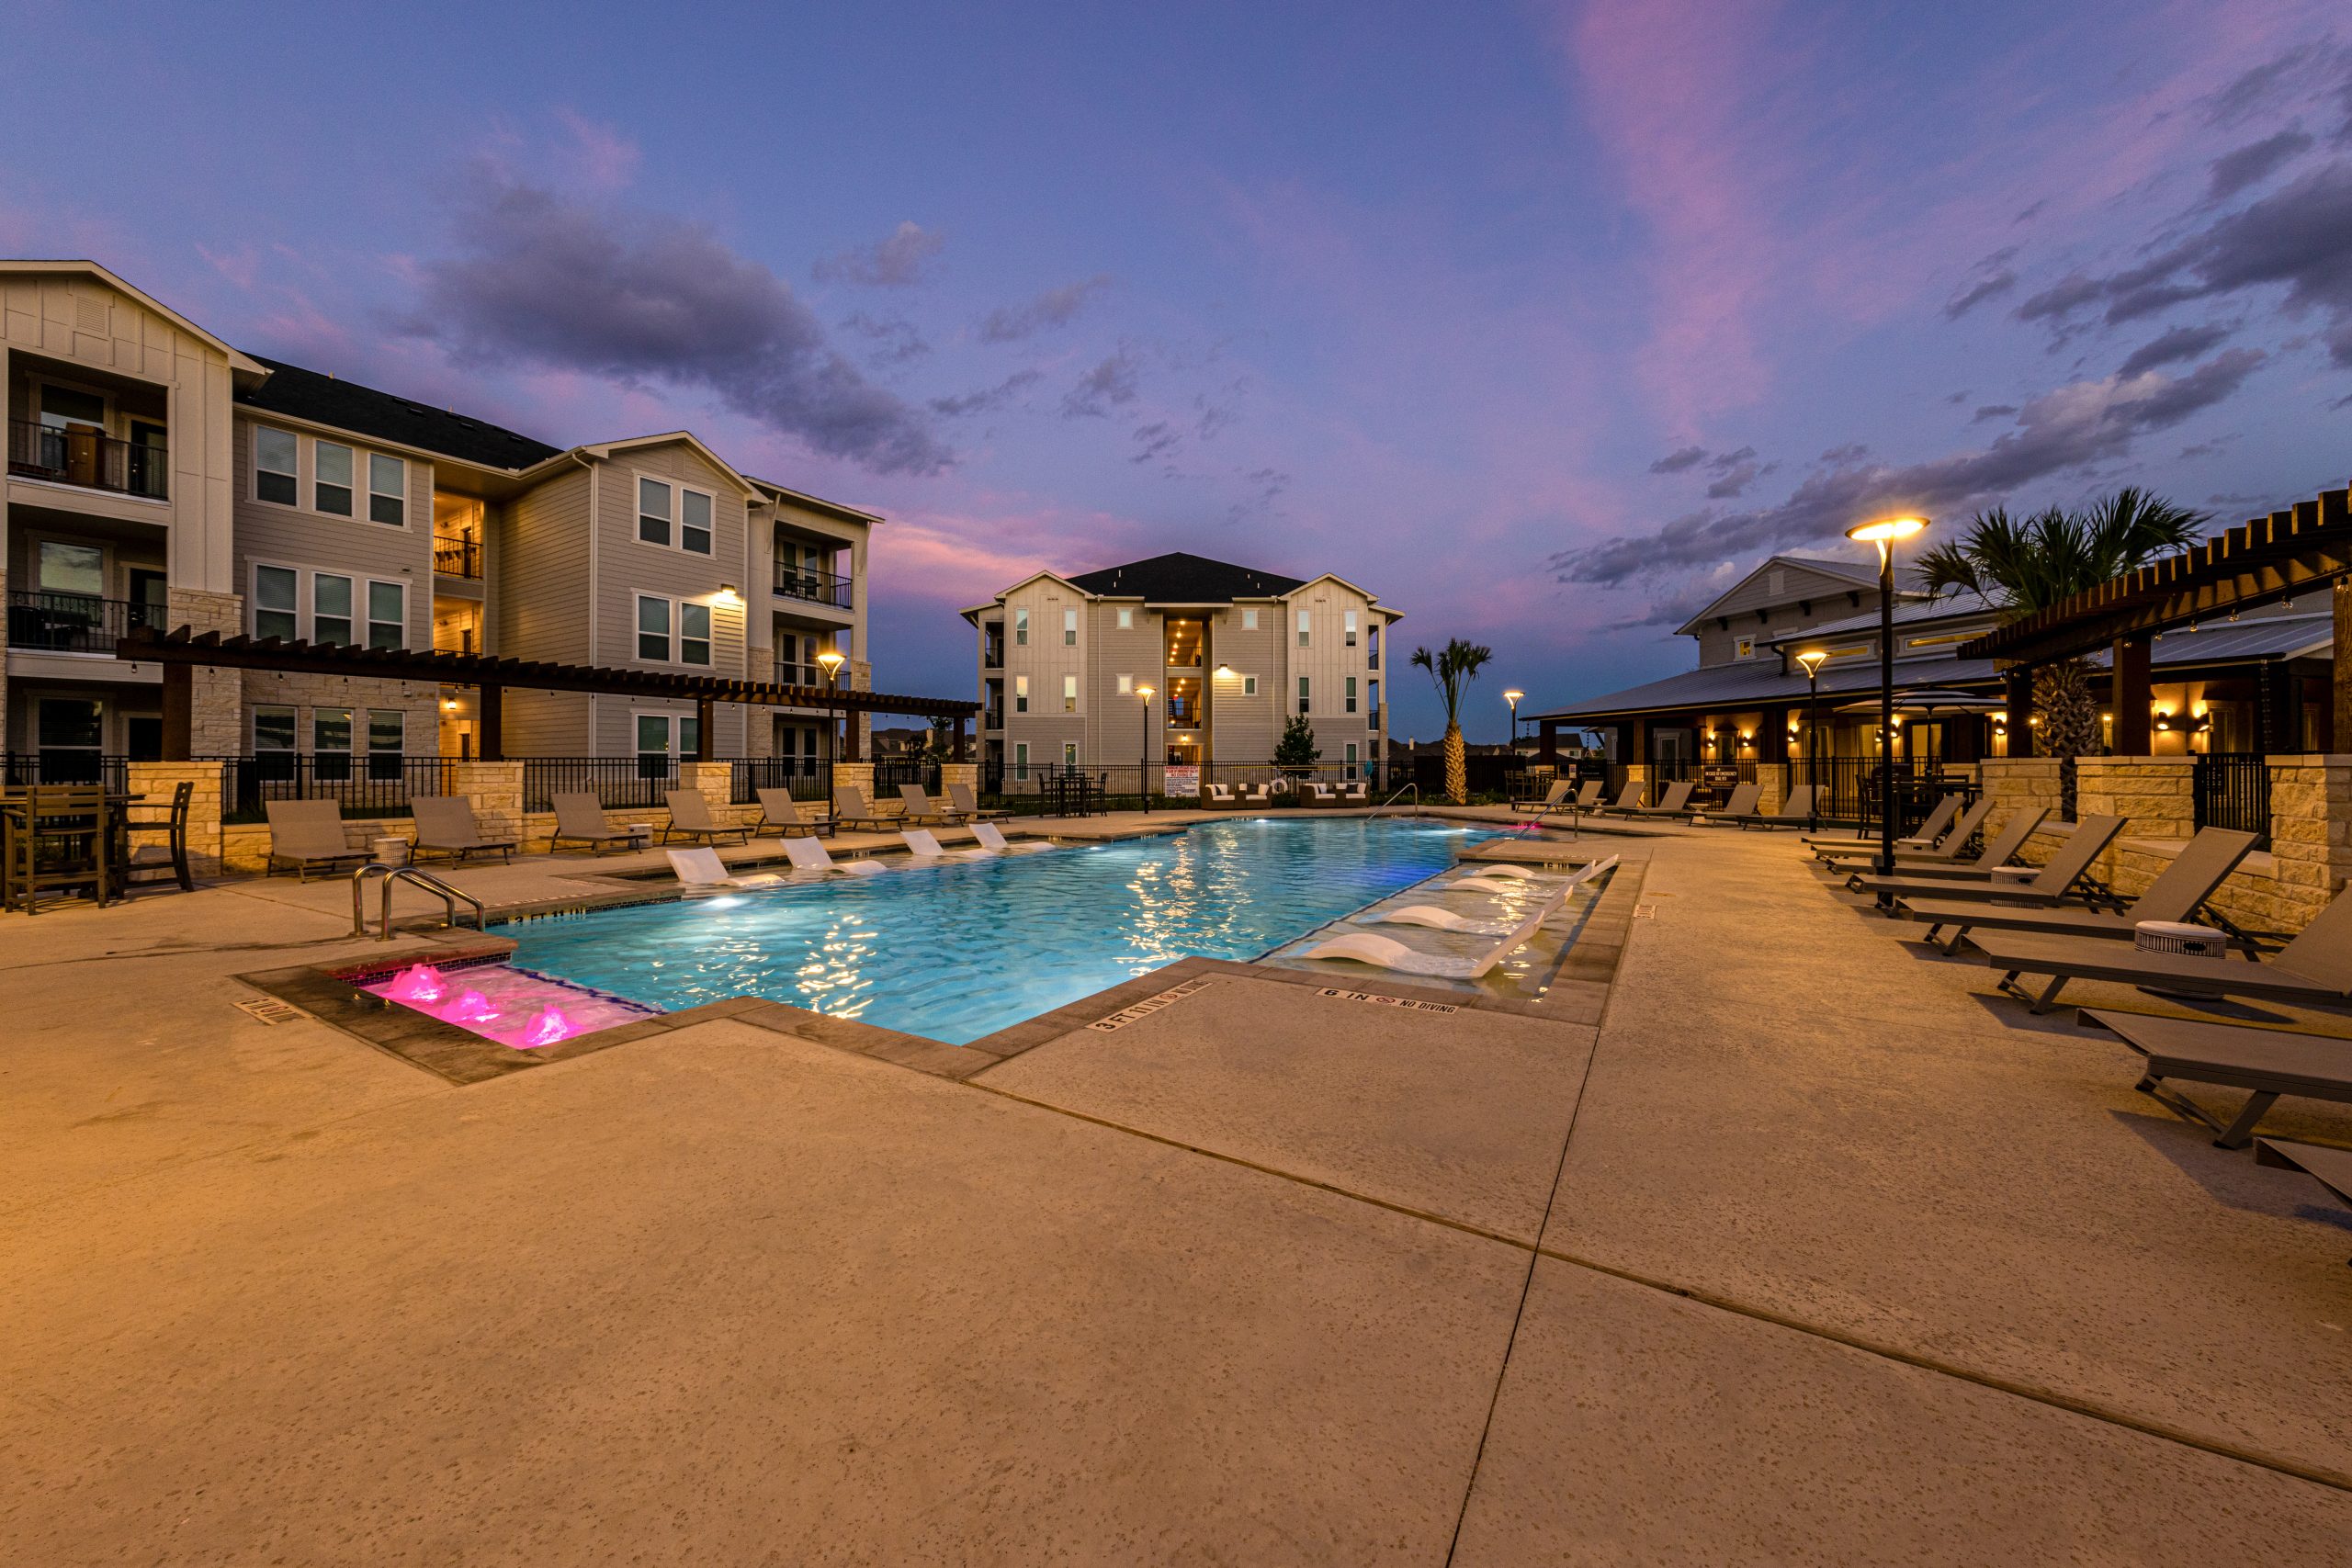 twilight photo of the pool at a multi-family commercial property